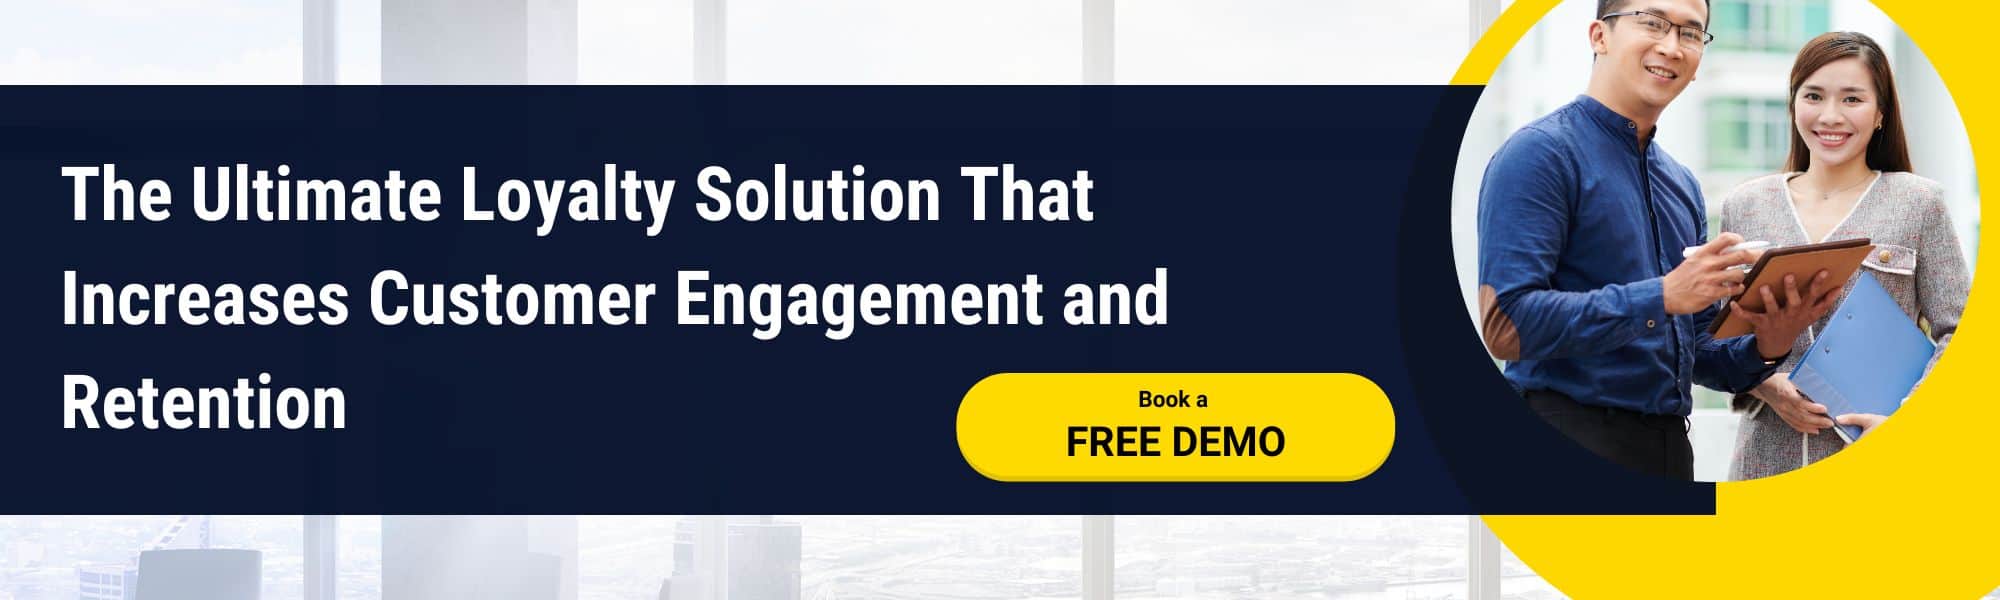 Customer Loyalty Program, EQuip Rewards: An image of a banner with texts reads 'The Ultimate Loyalty Solution That Increases Customer Engagement and Retention', encouraging businesses to gain an advantage in their market with these solutions